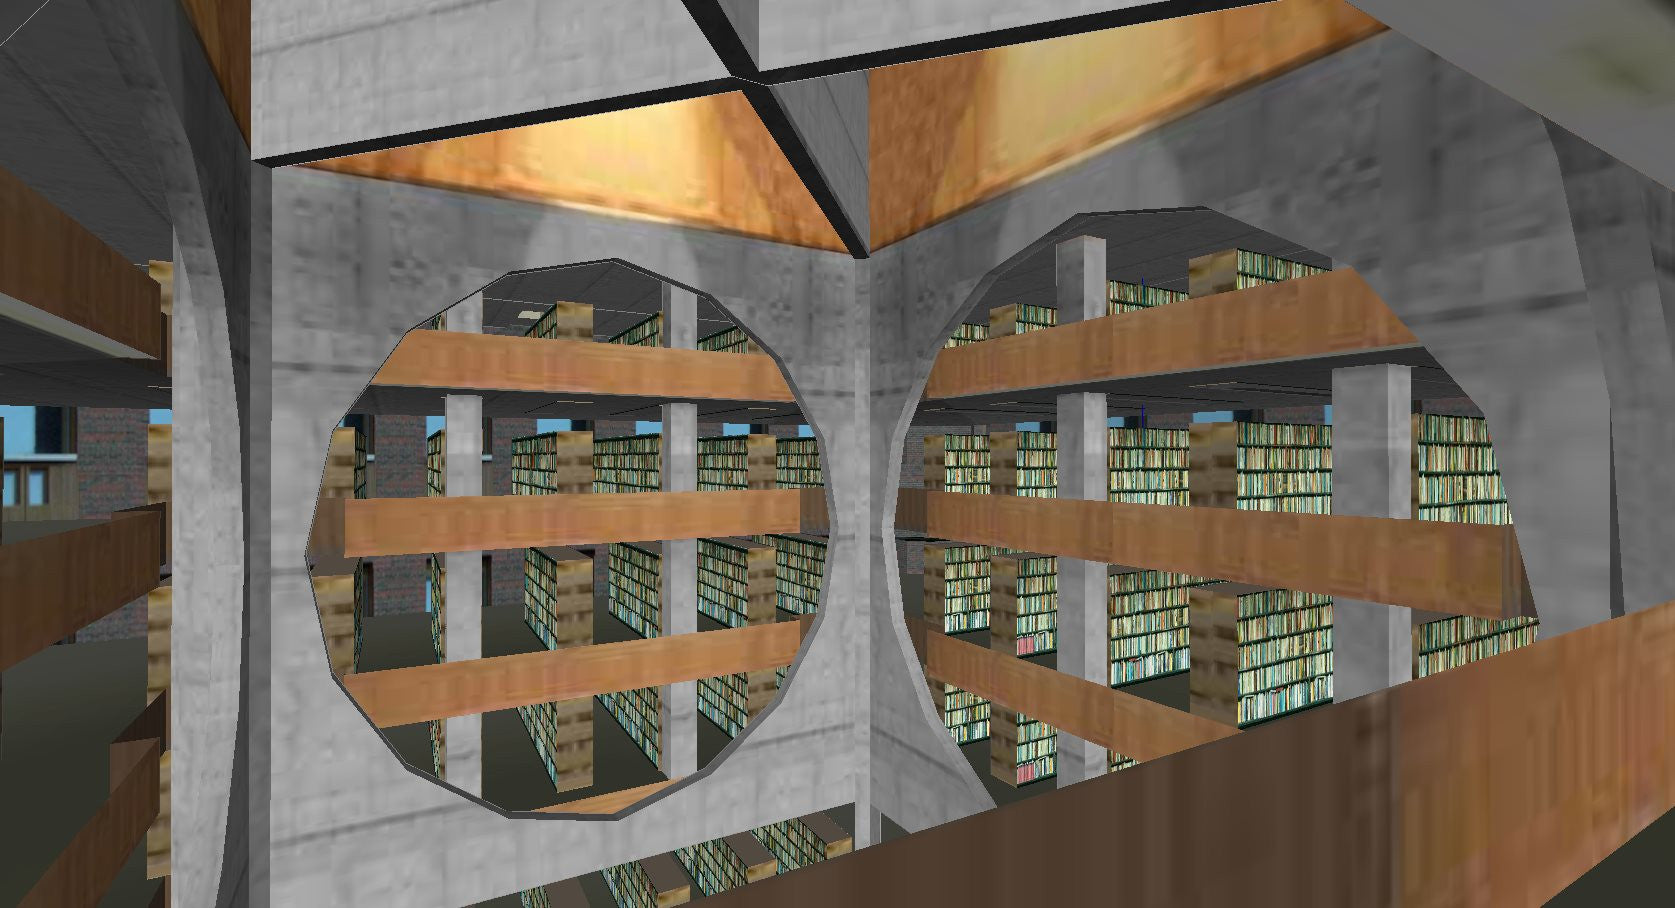 Download 7 Projects of Louis Kahn Architecture Sketchup 3D Models